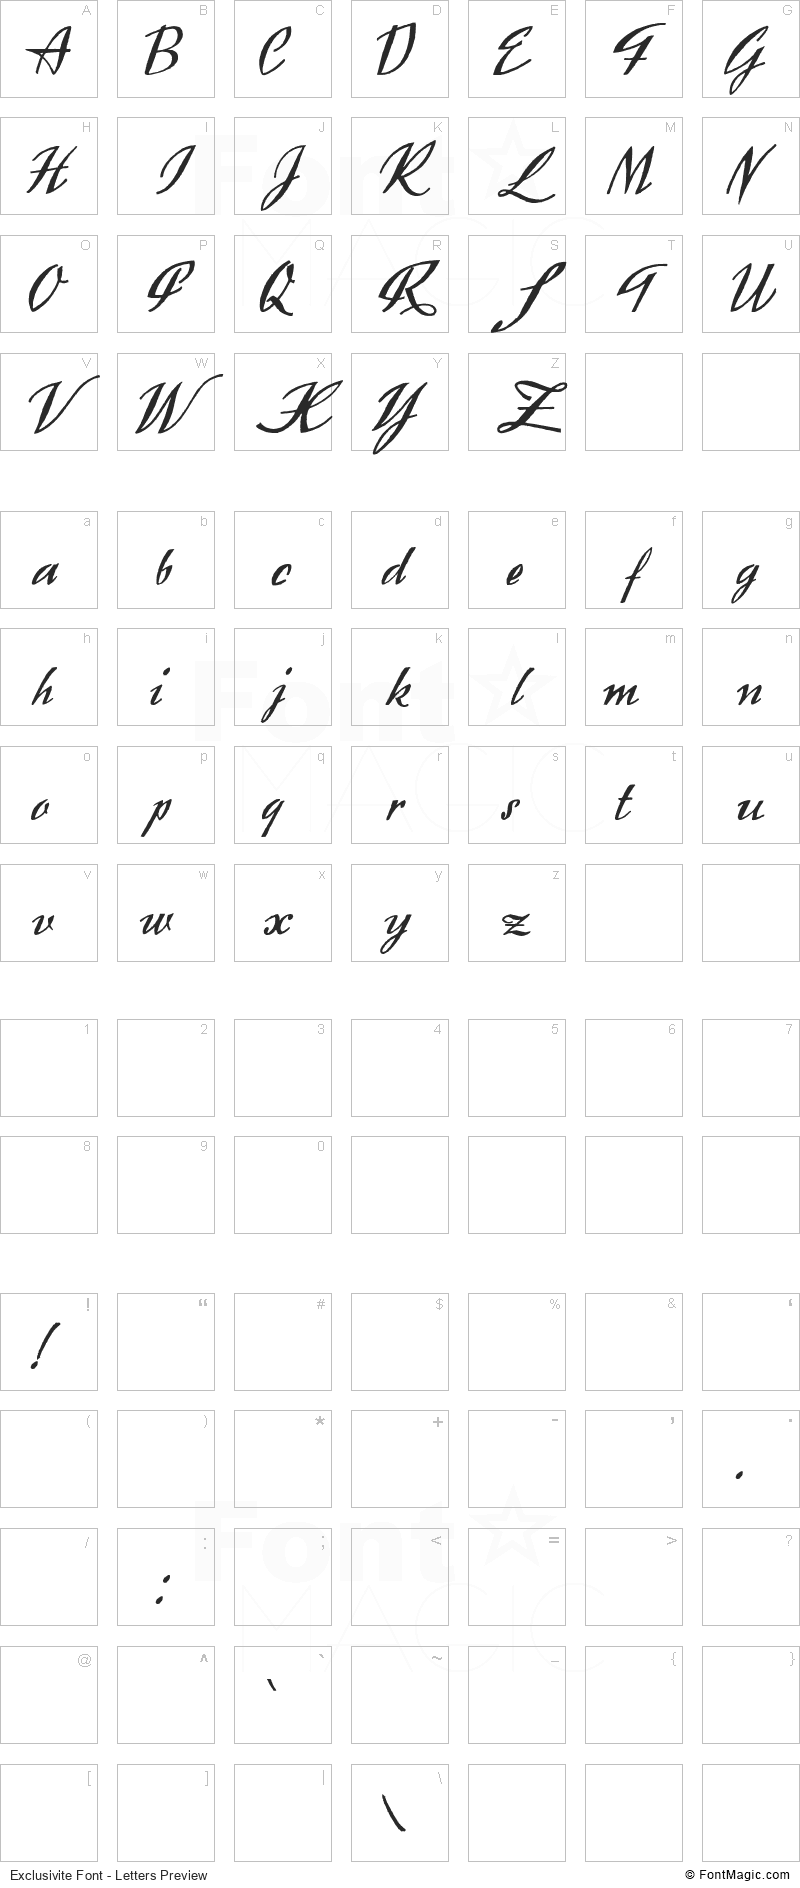 Exclusivite Font - All Latters Preview Chart